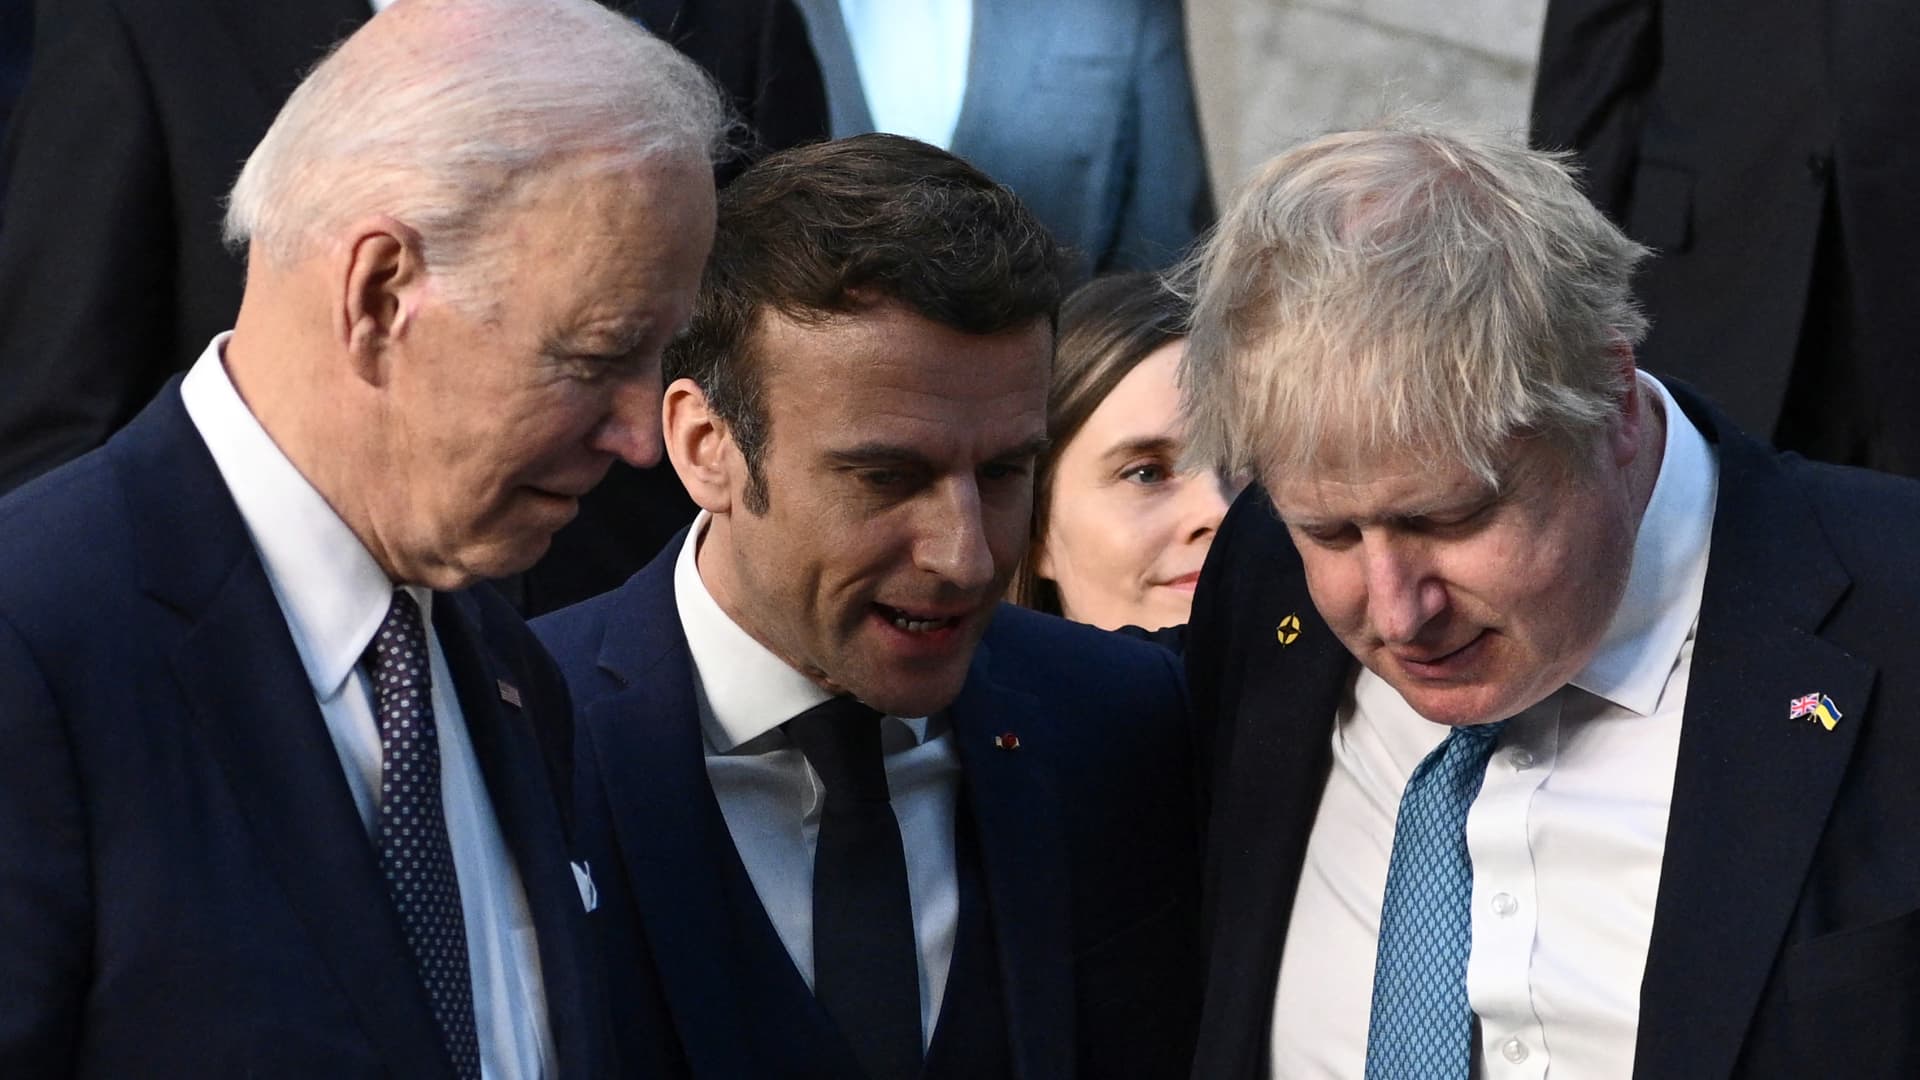 Britain's Prime Minister Boris Johnson, France's President Emmanuel Macron and US President Joe Biden talk as they arrive at NATO Headquarters in Brussels, Belgium, March 24, 2022.